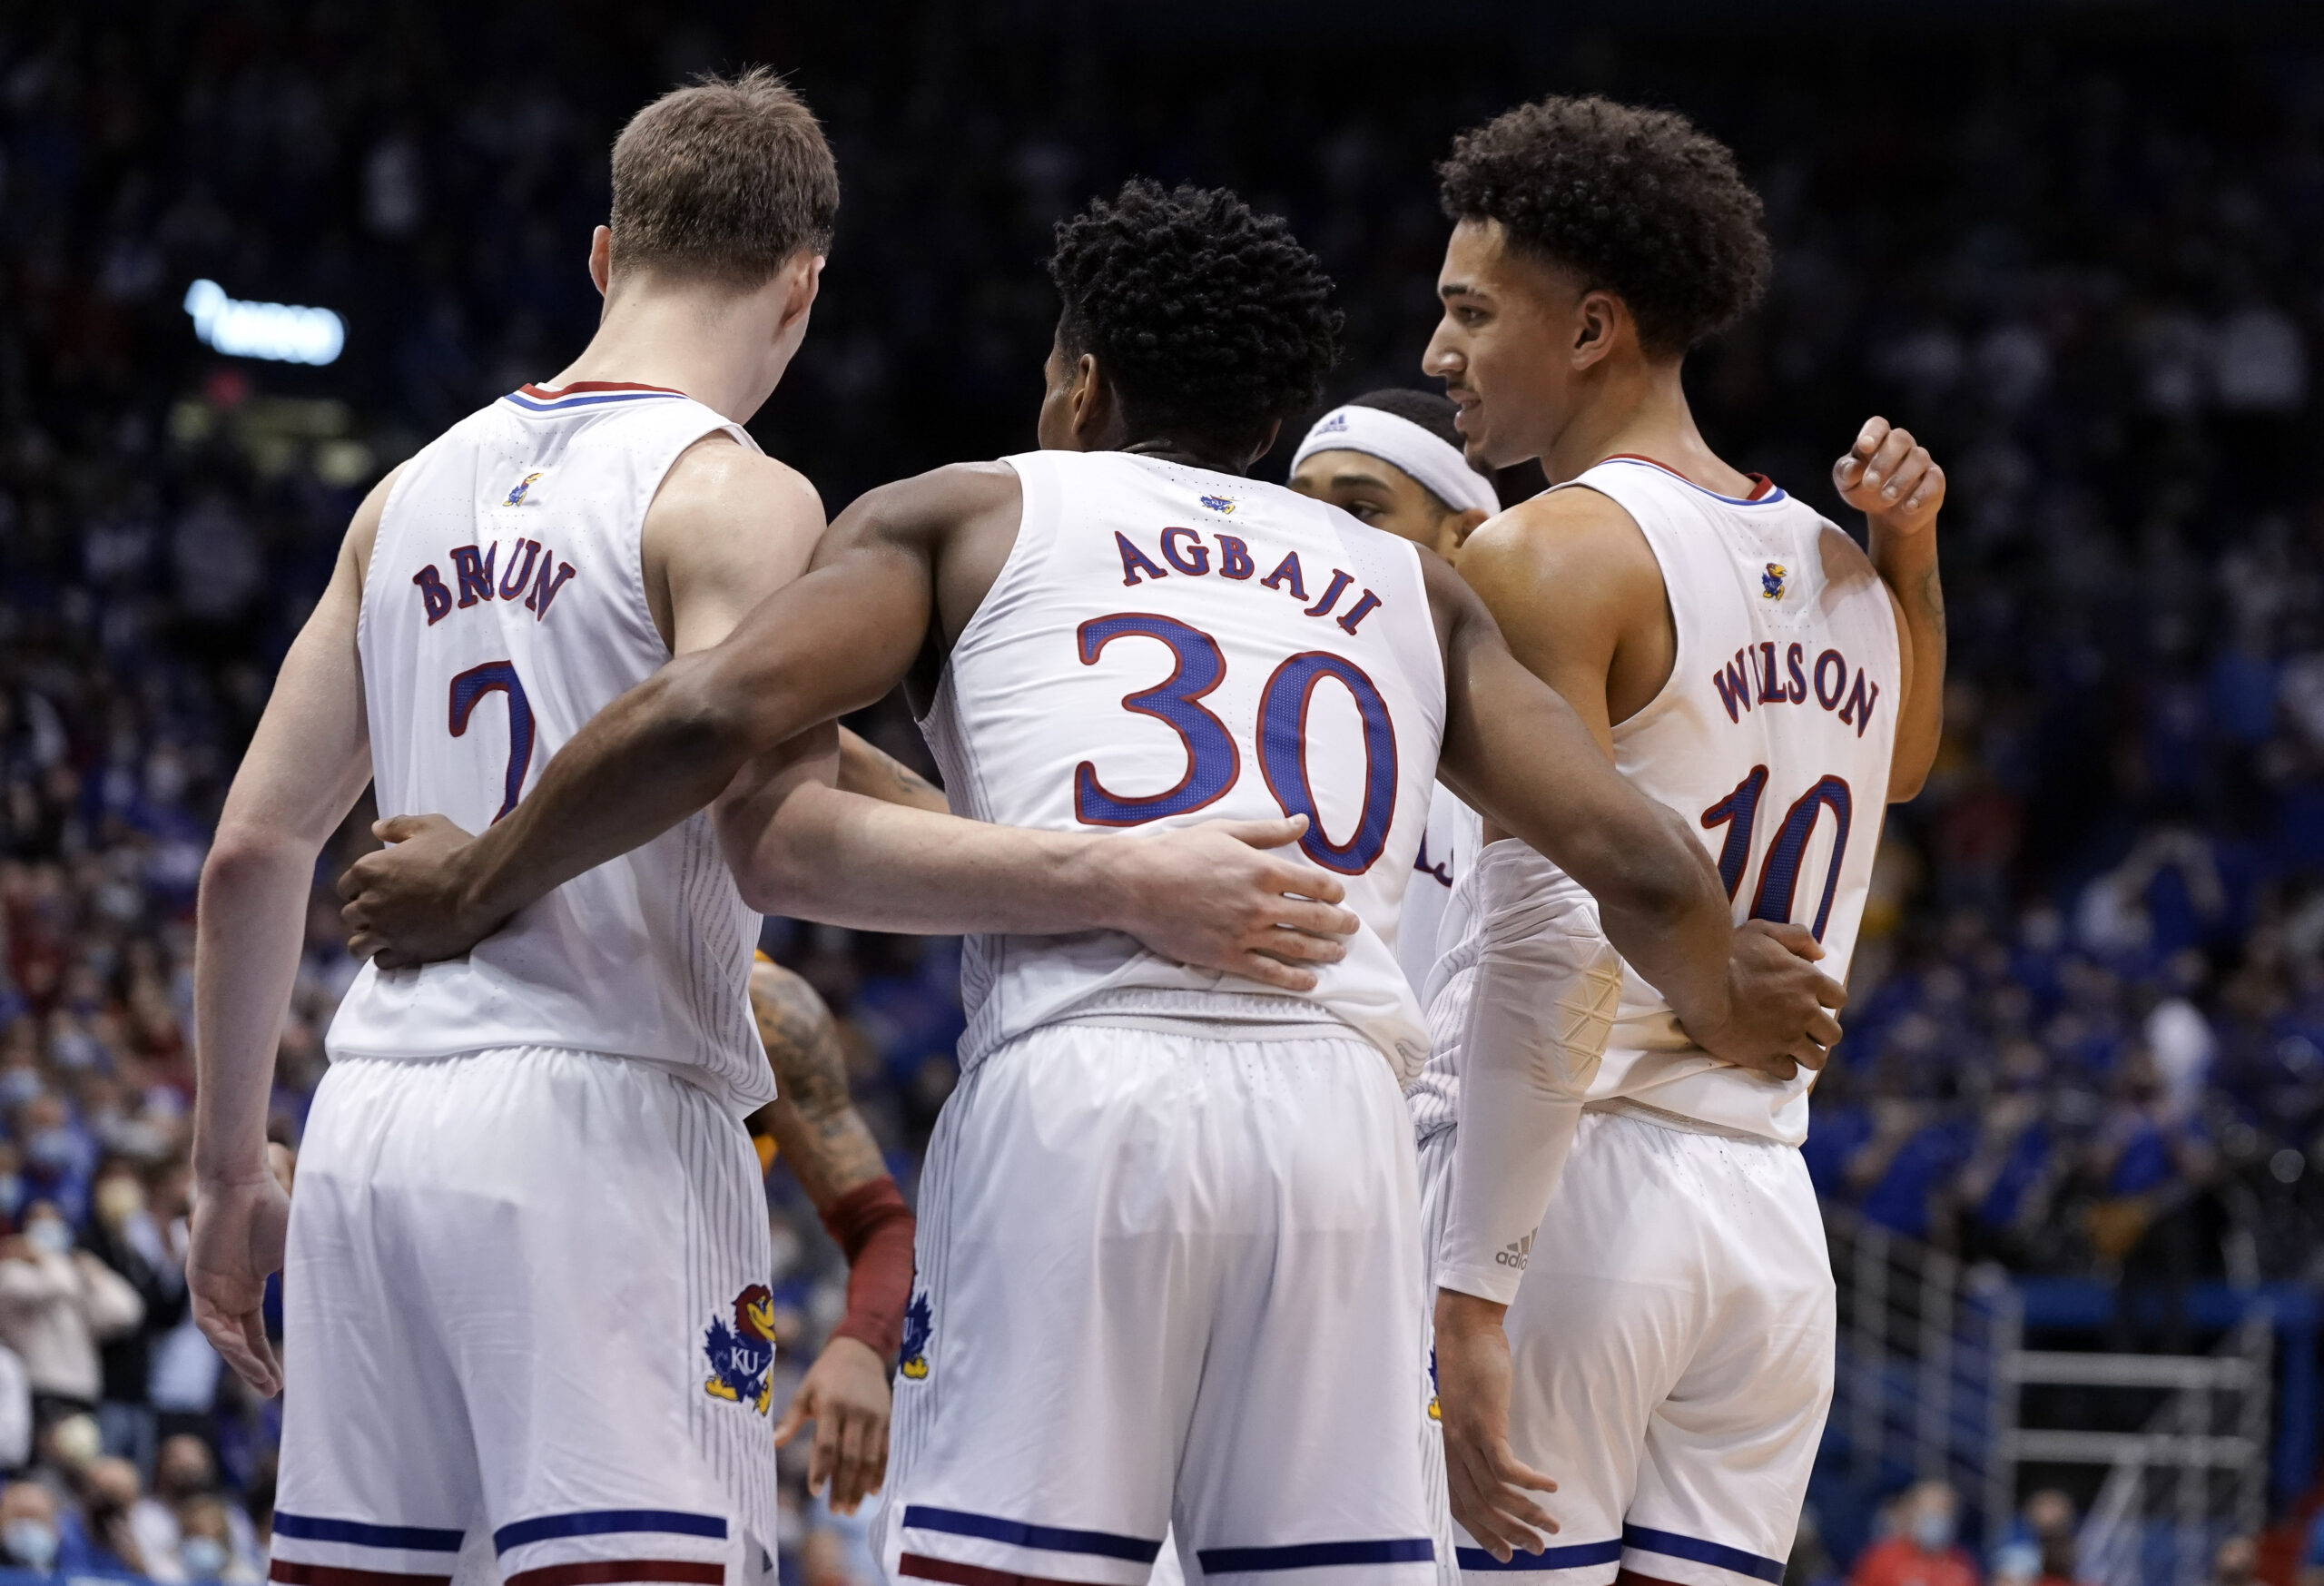 Kansas vs UNC Preview and Pick –